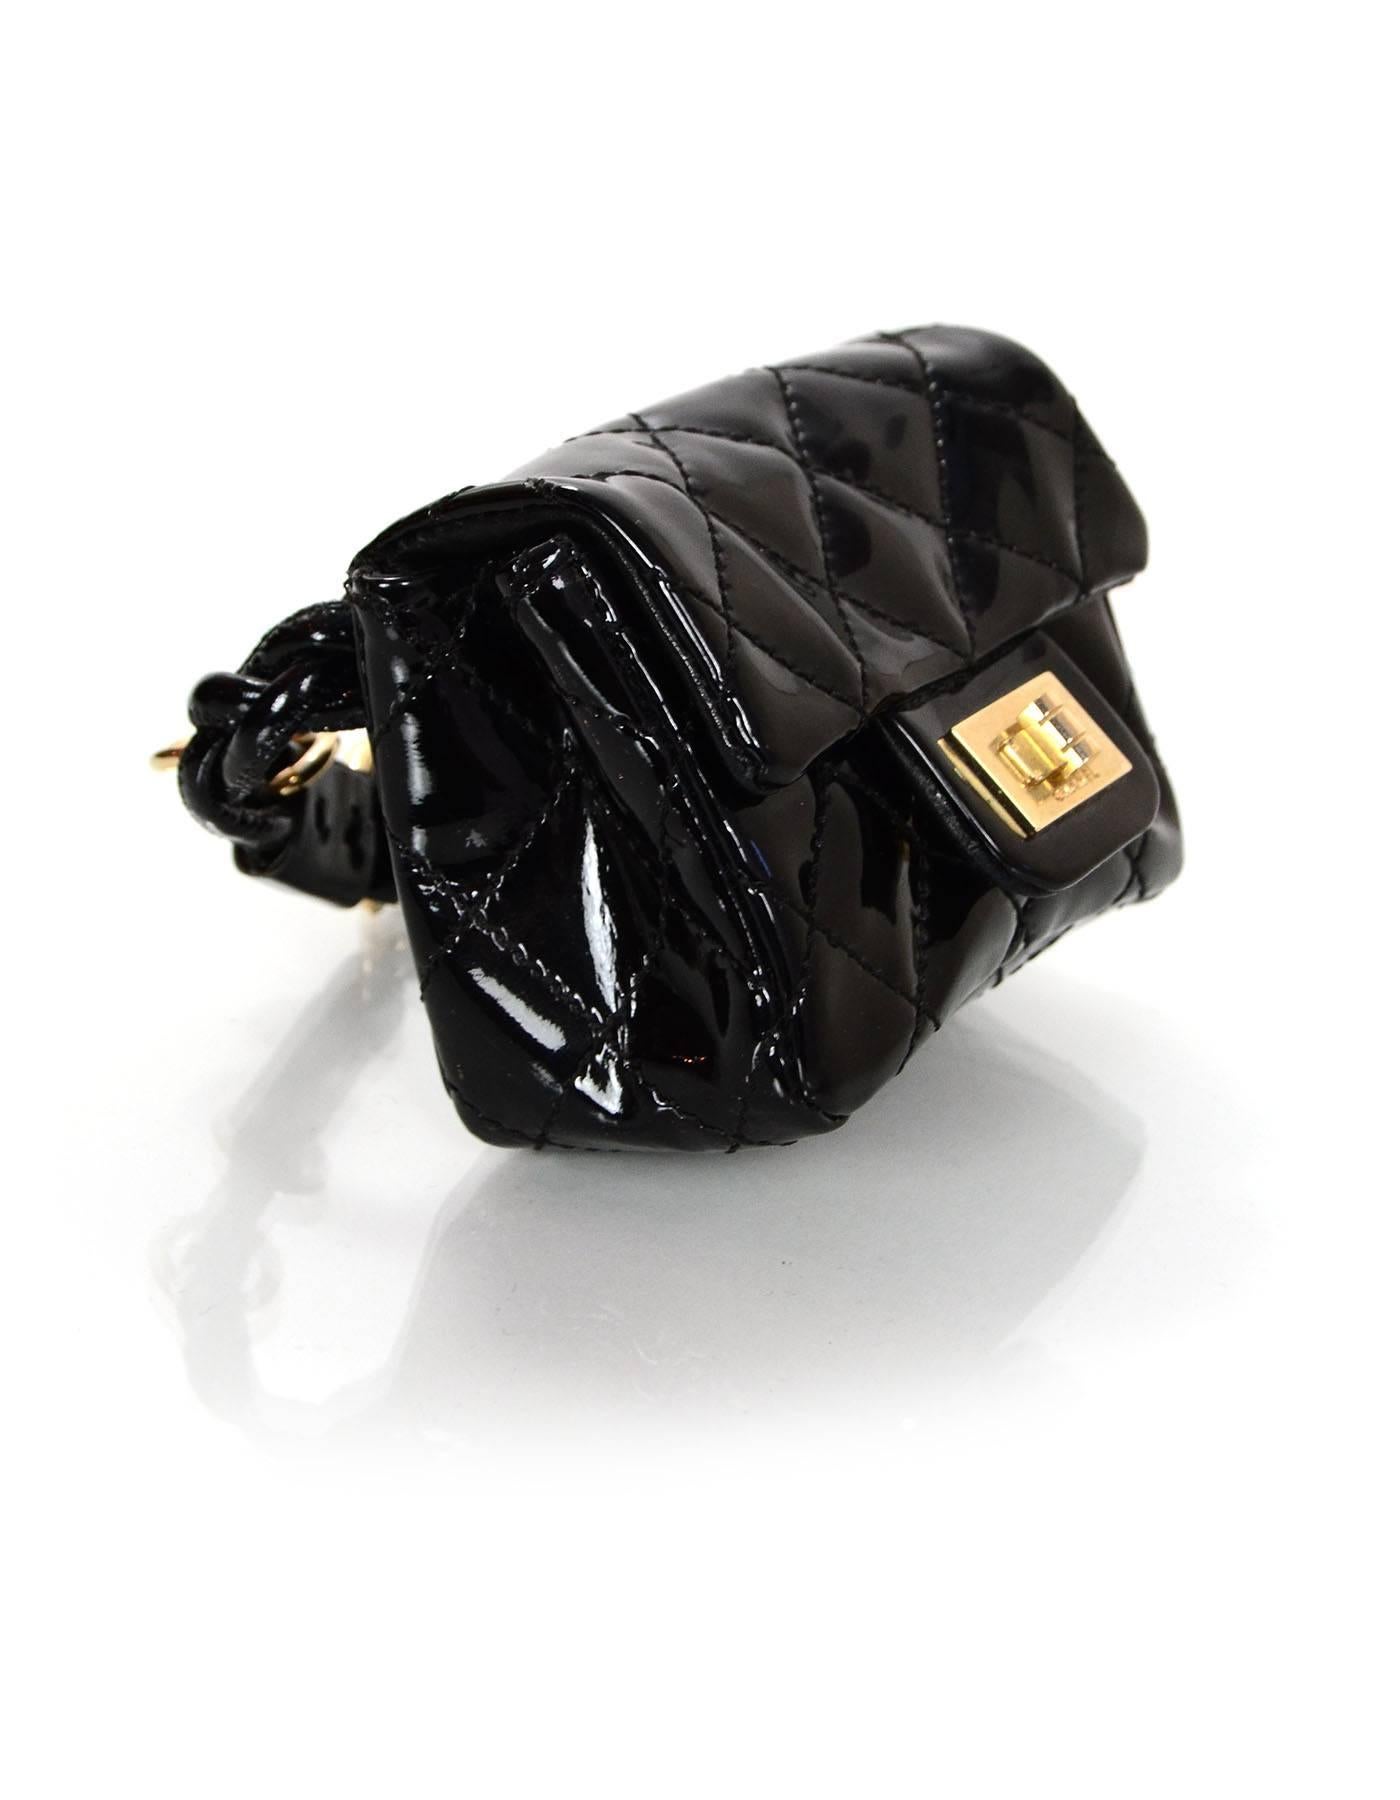 Chanel Black Quilted Patent Re-Issue Ankle Bag 
Features adjustable patent braided strap so can be worn as ankle or wrist bag

Made In: France
Year of Production: 2007
Color: Black
Hardware: Light goldtone
Materials: Patent leather
Lining: